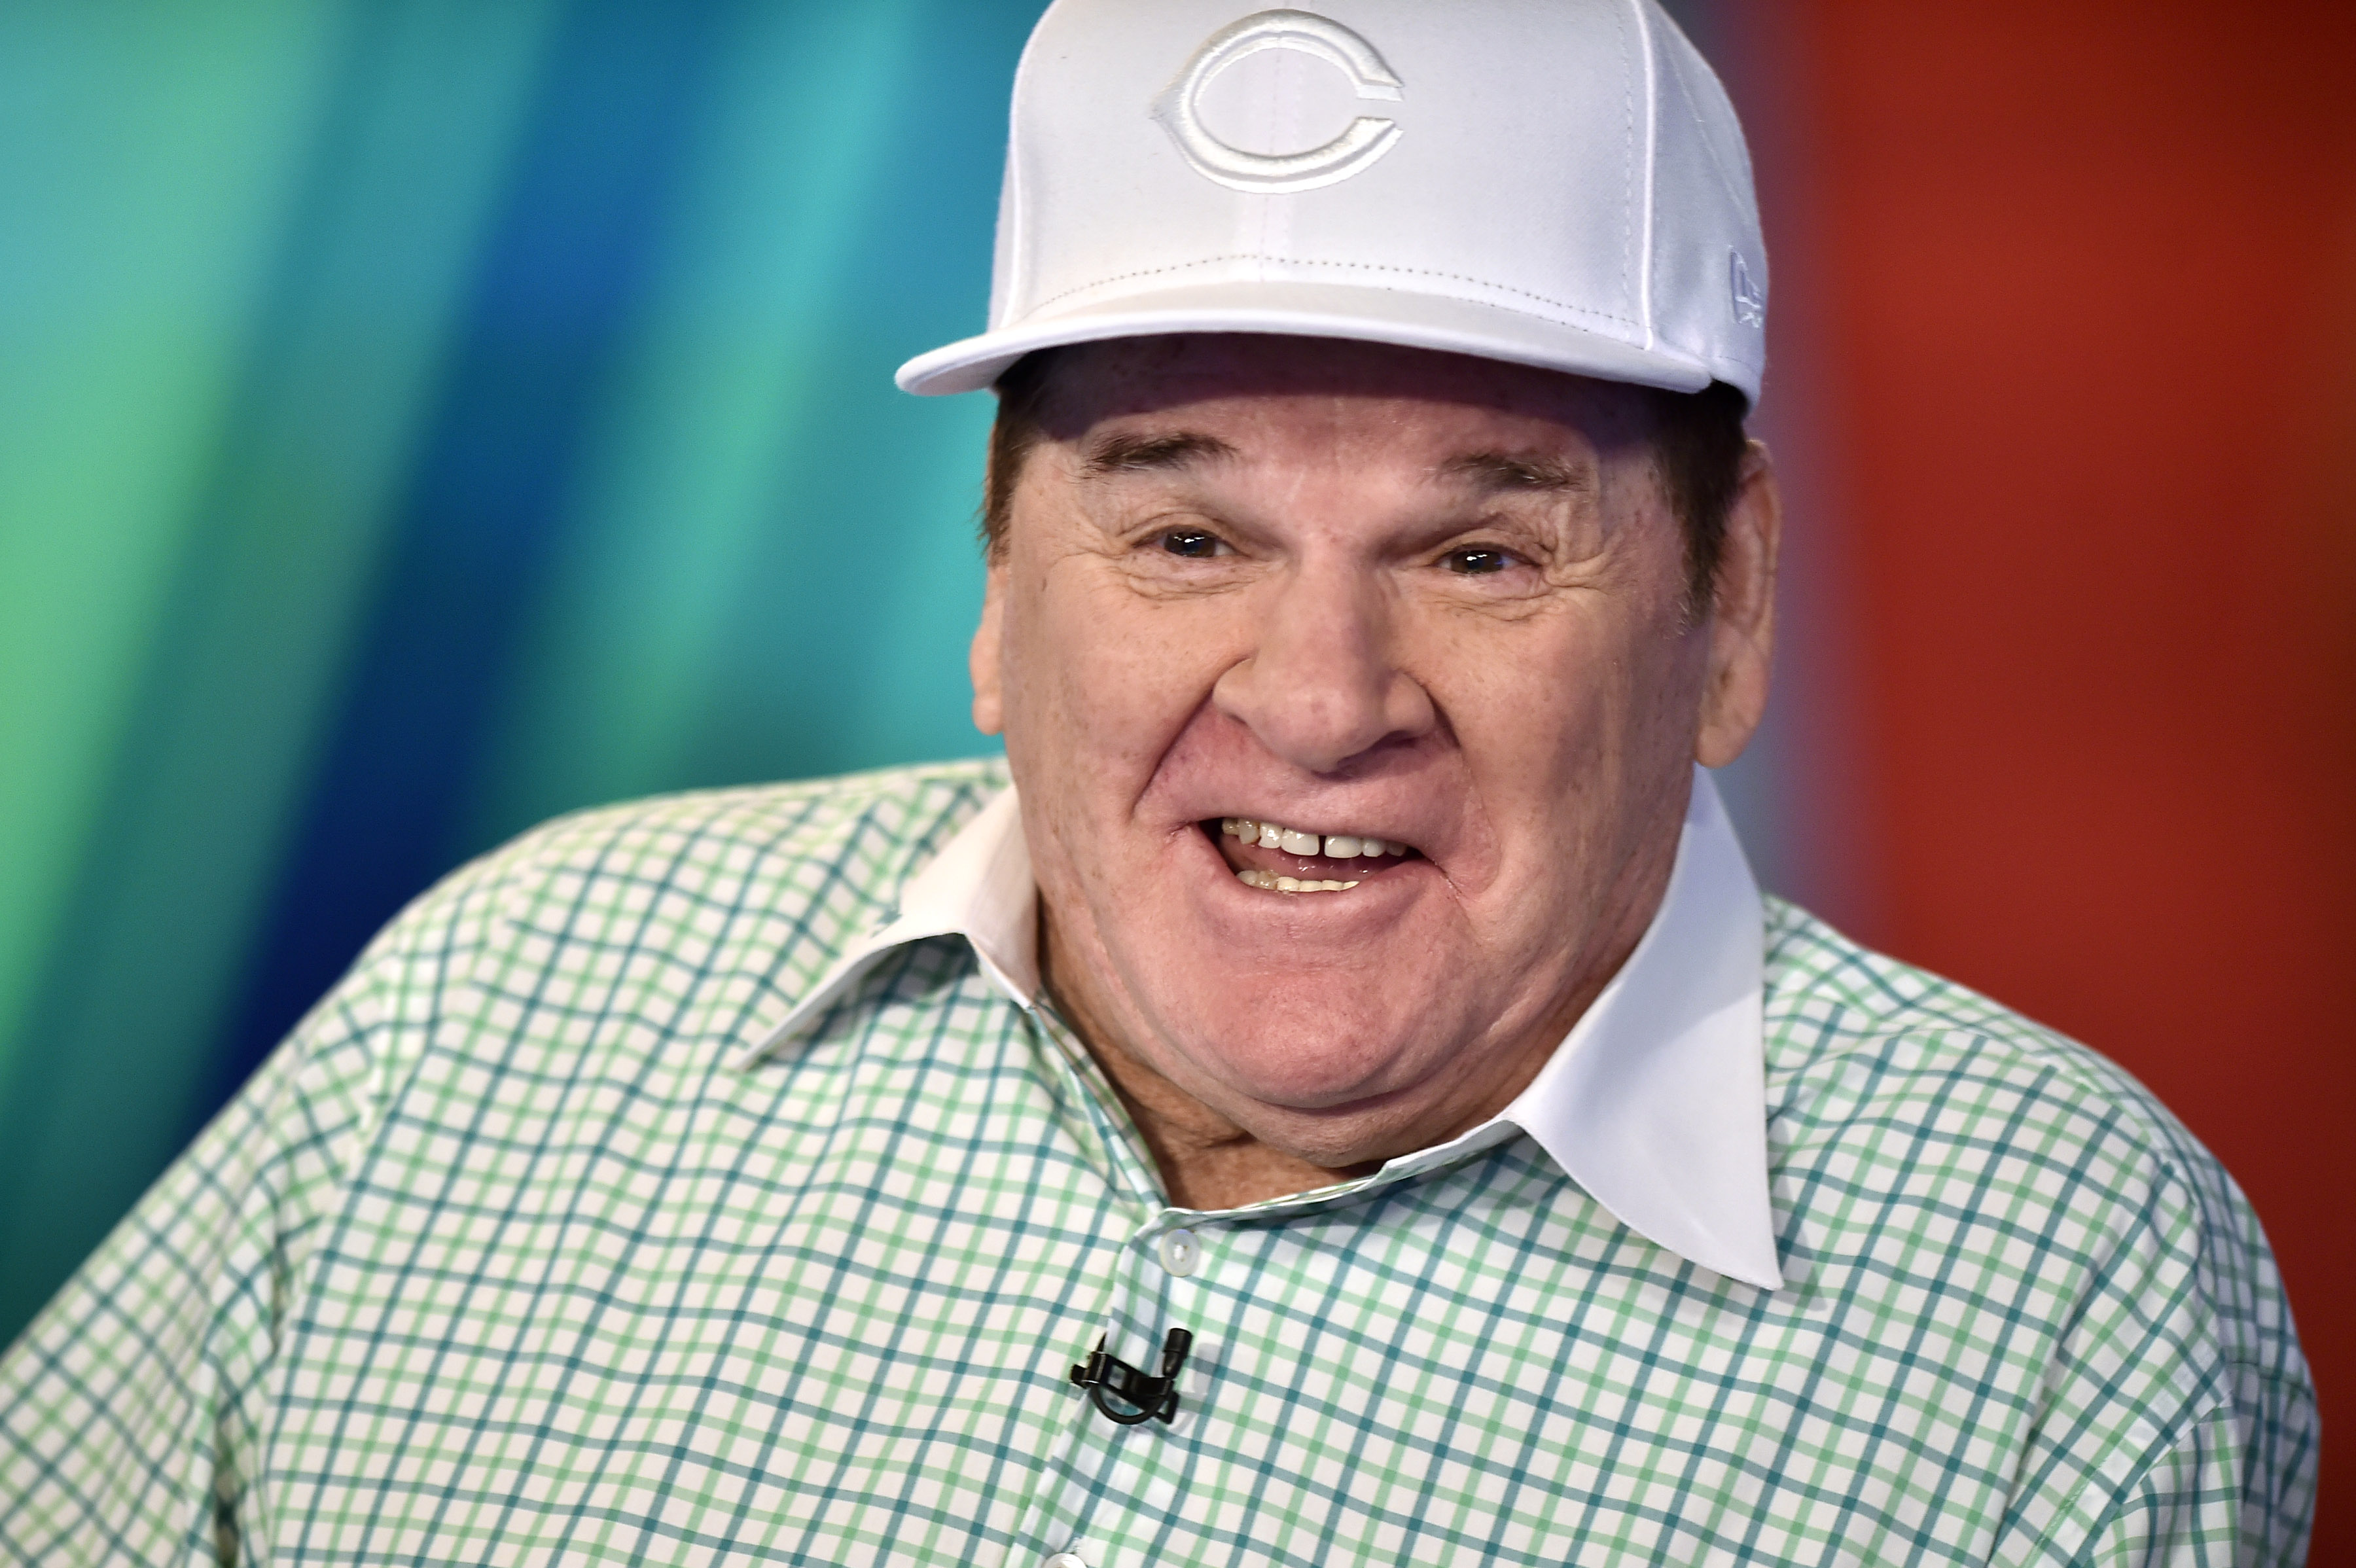 Pete Rose, MLB’s All-Time Hits Leader, Once Rattled Off His List of Untouchable Baseball Records